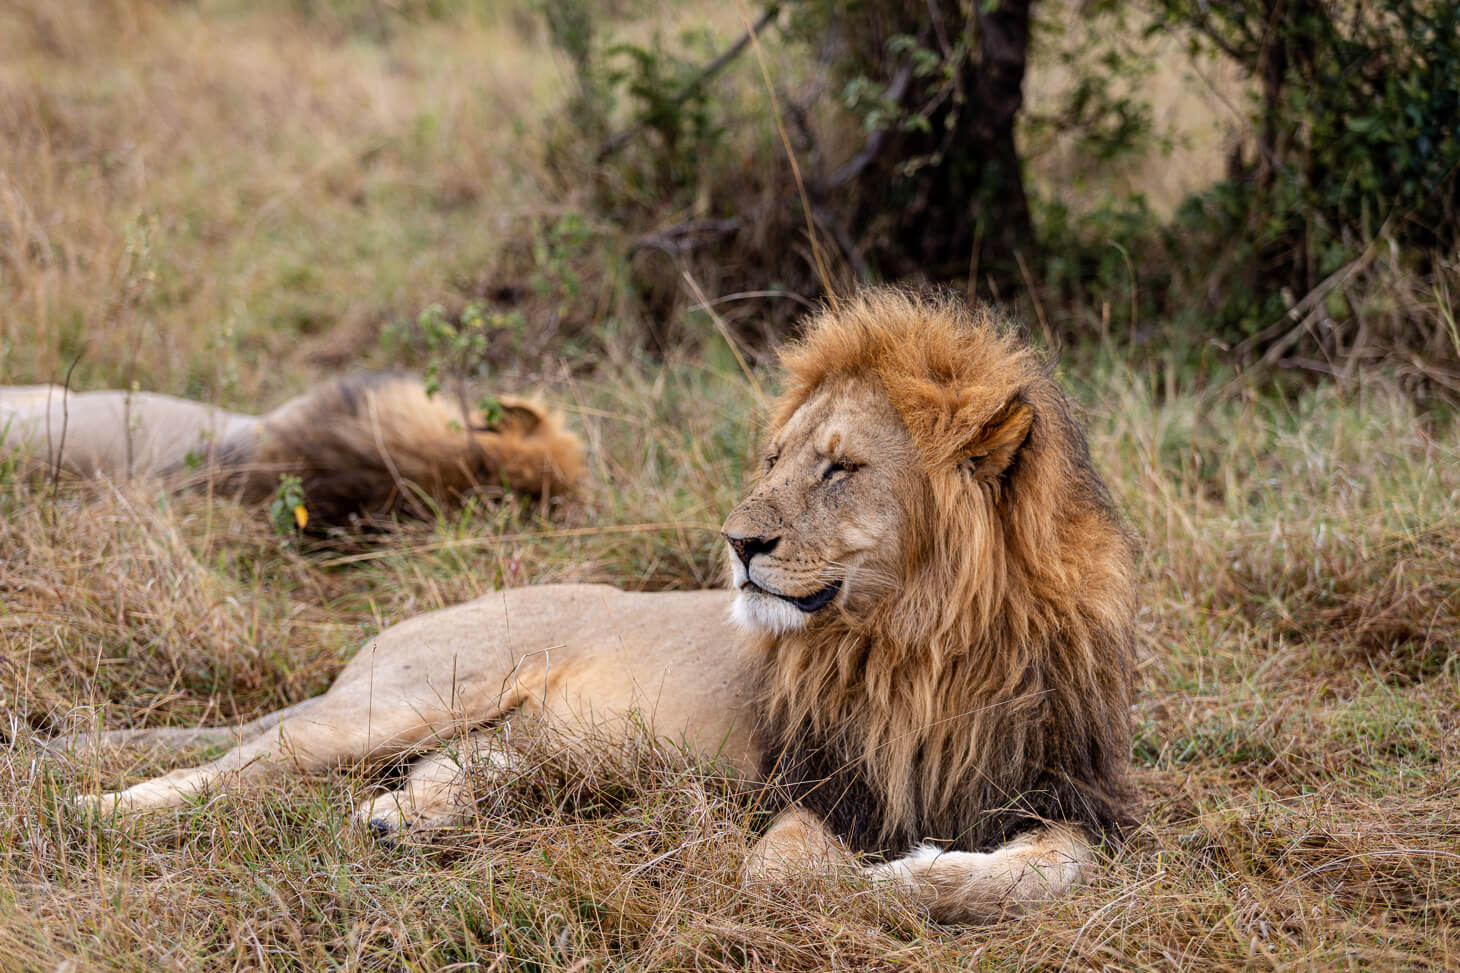 A male lion resting in the grassand